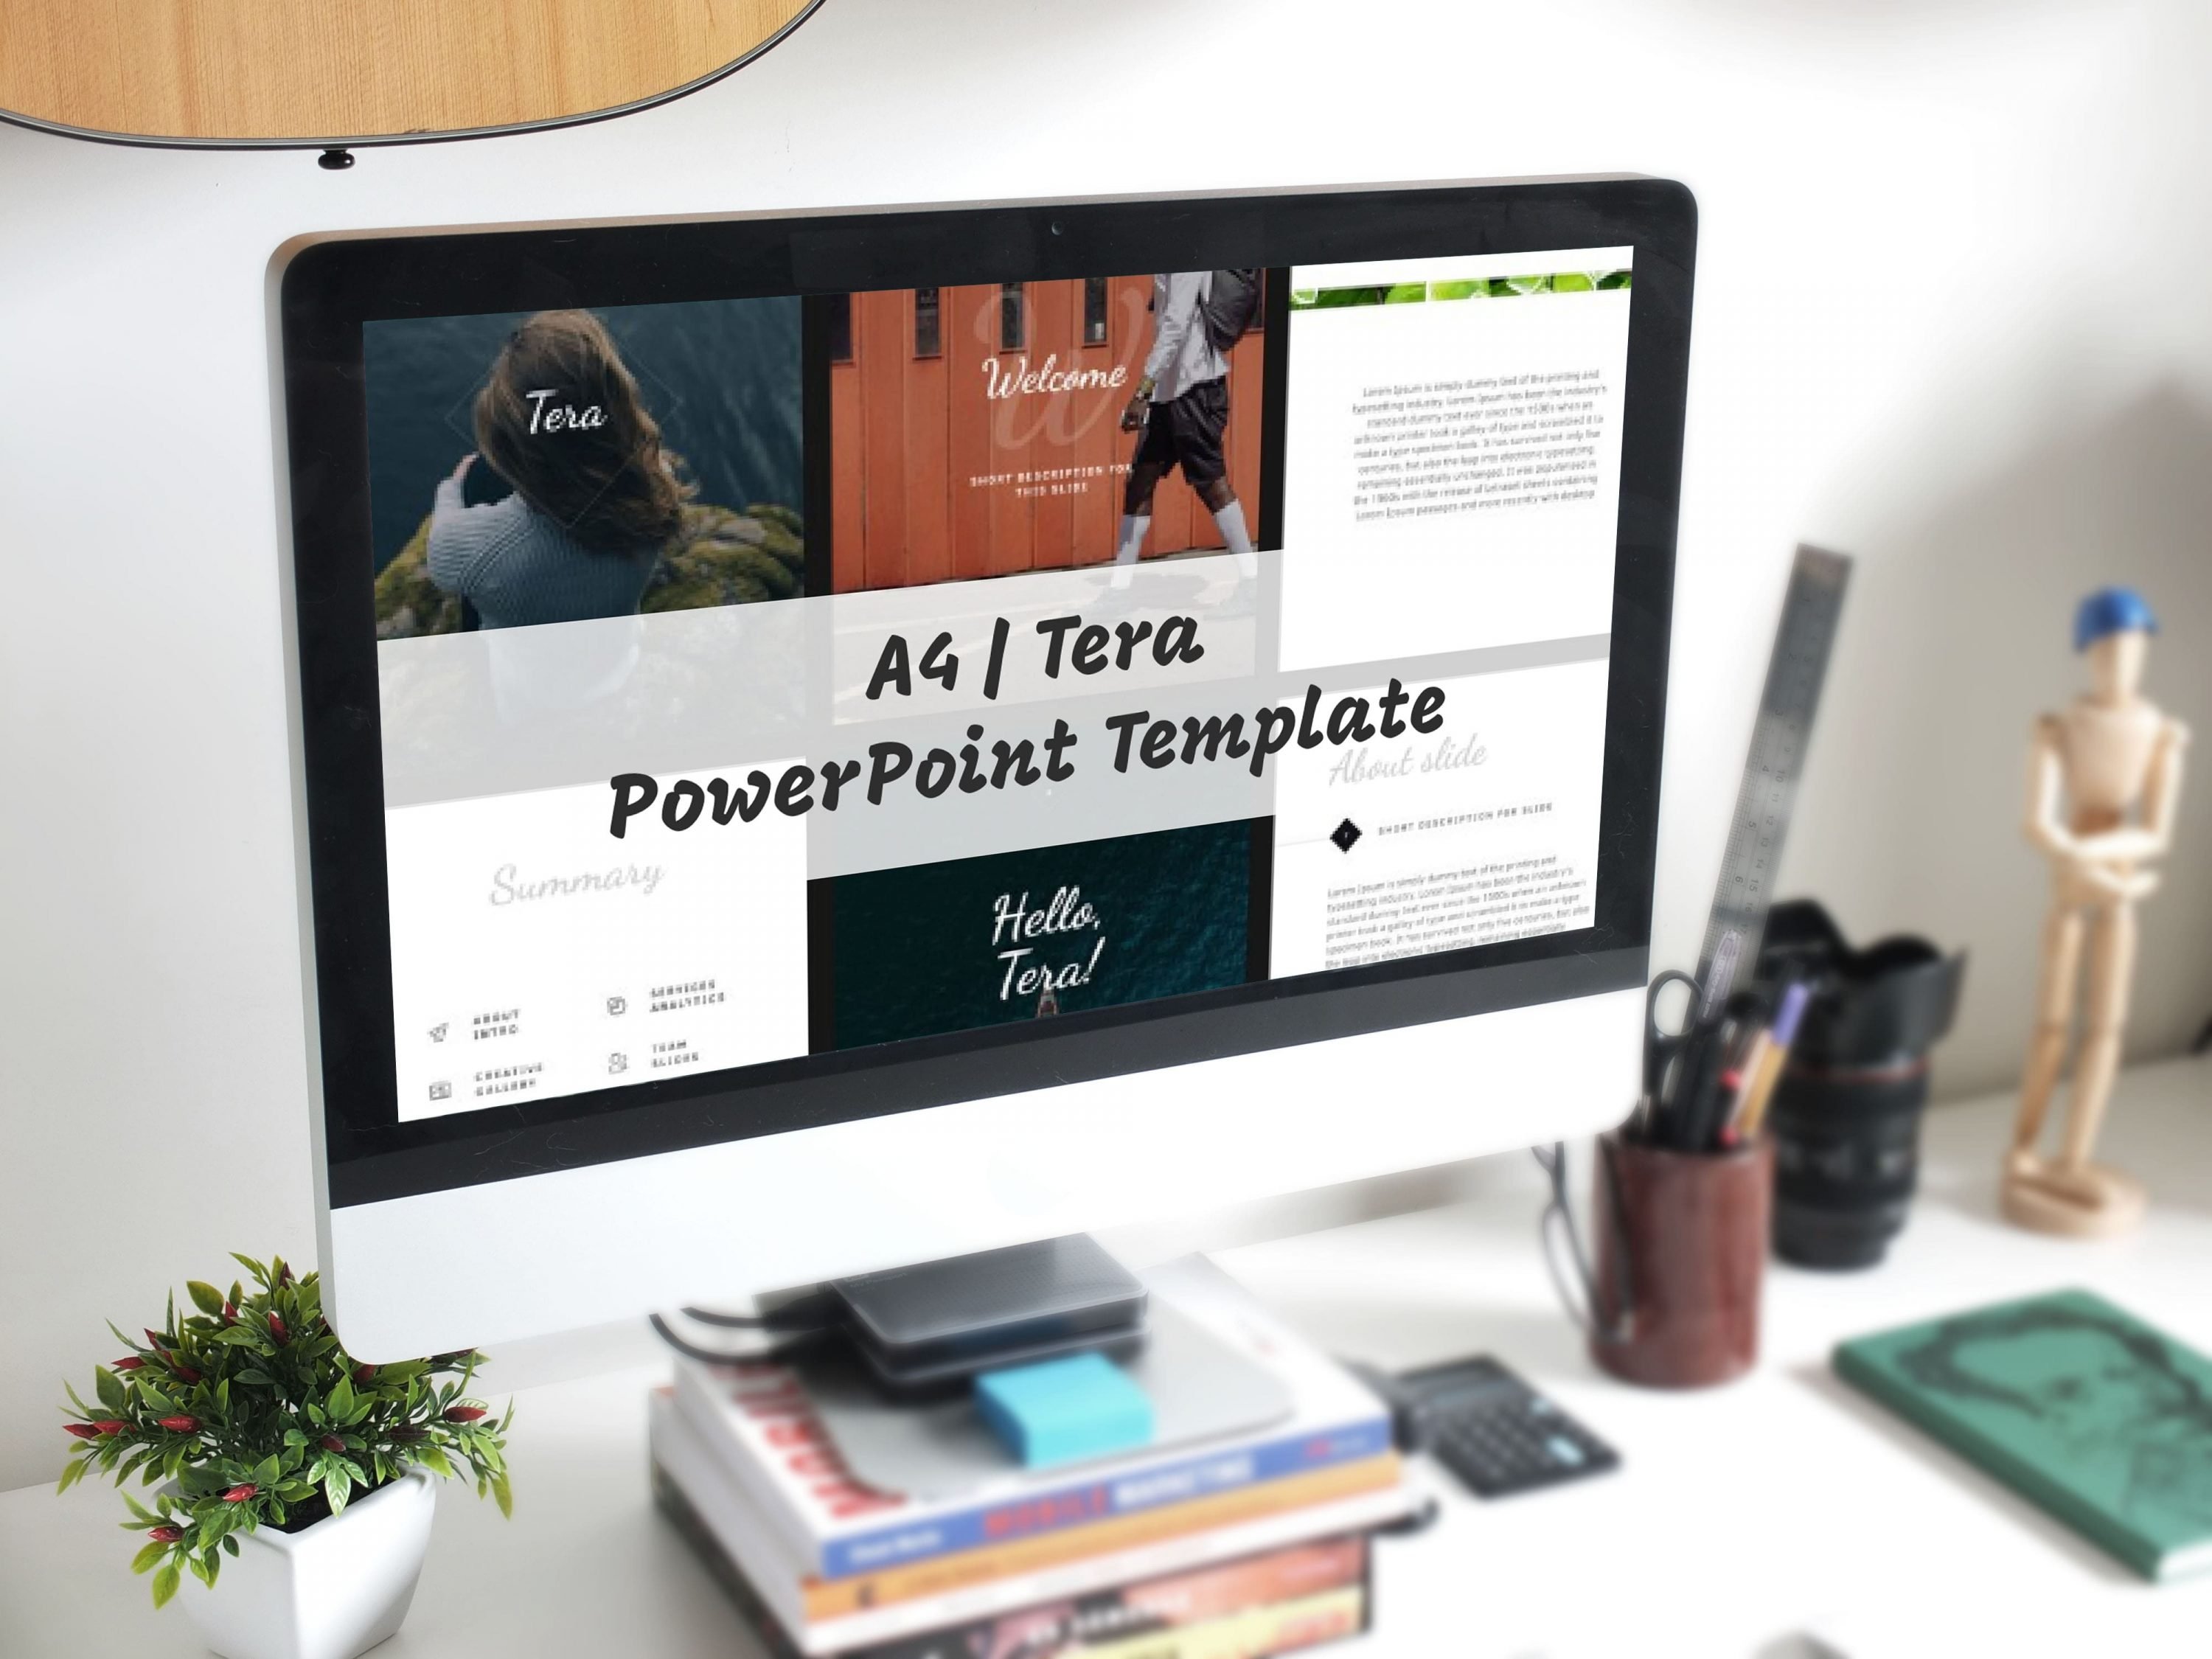 Desktop option of the A4 | Tera PowerPoint Template.